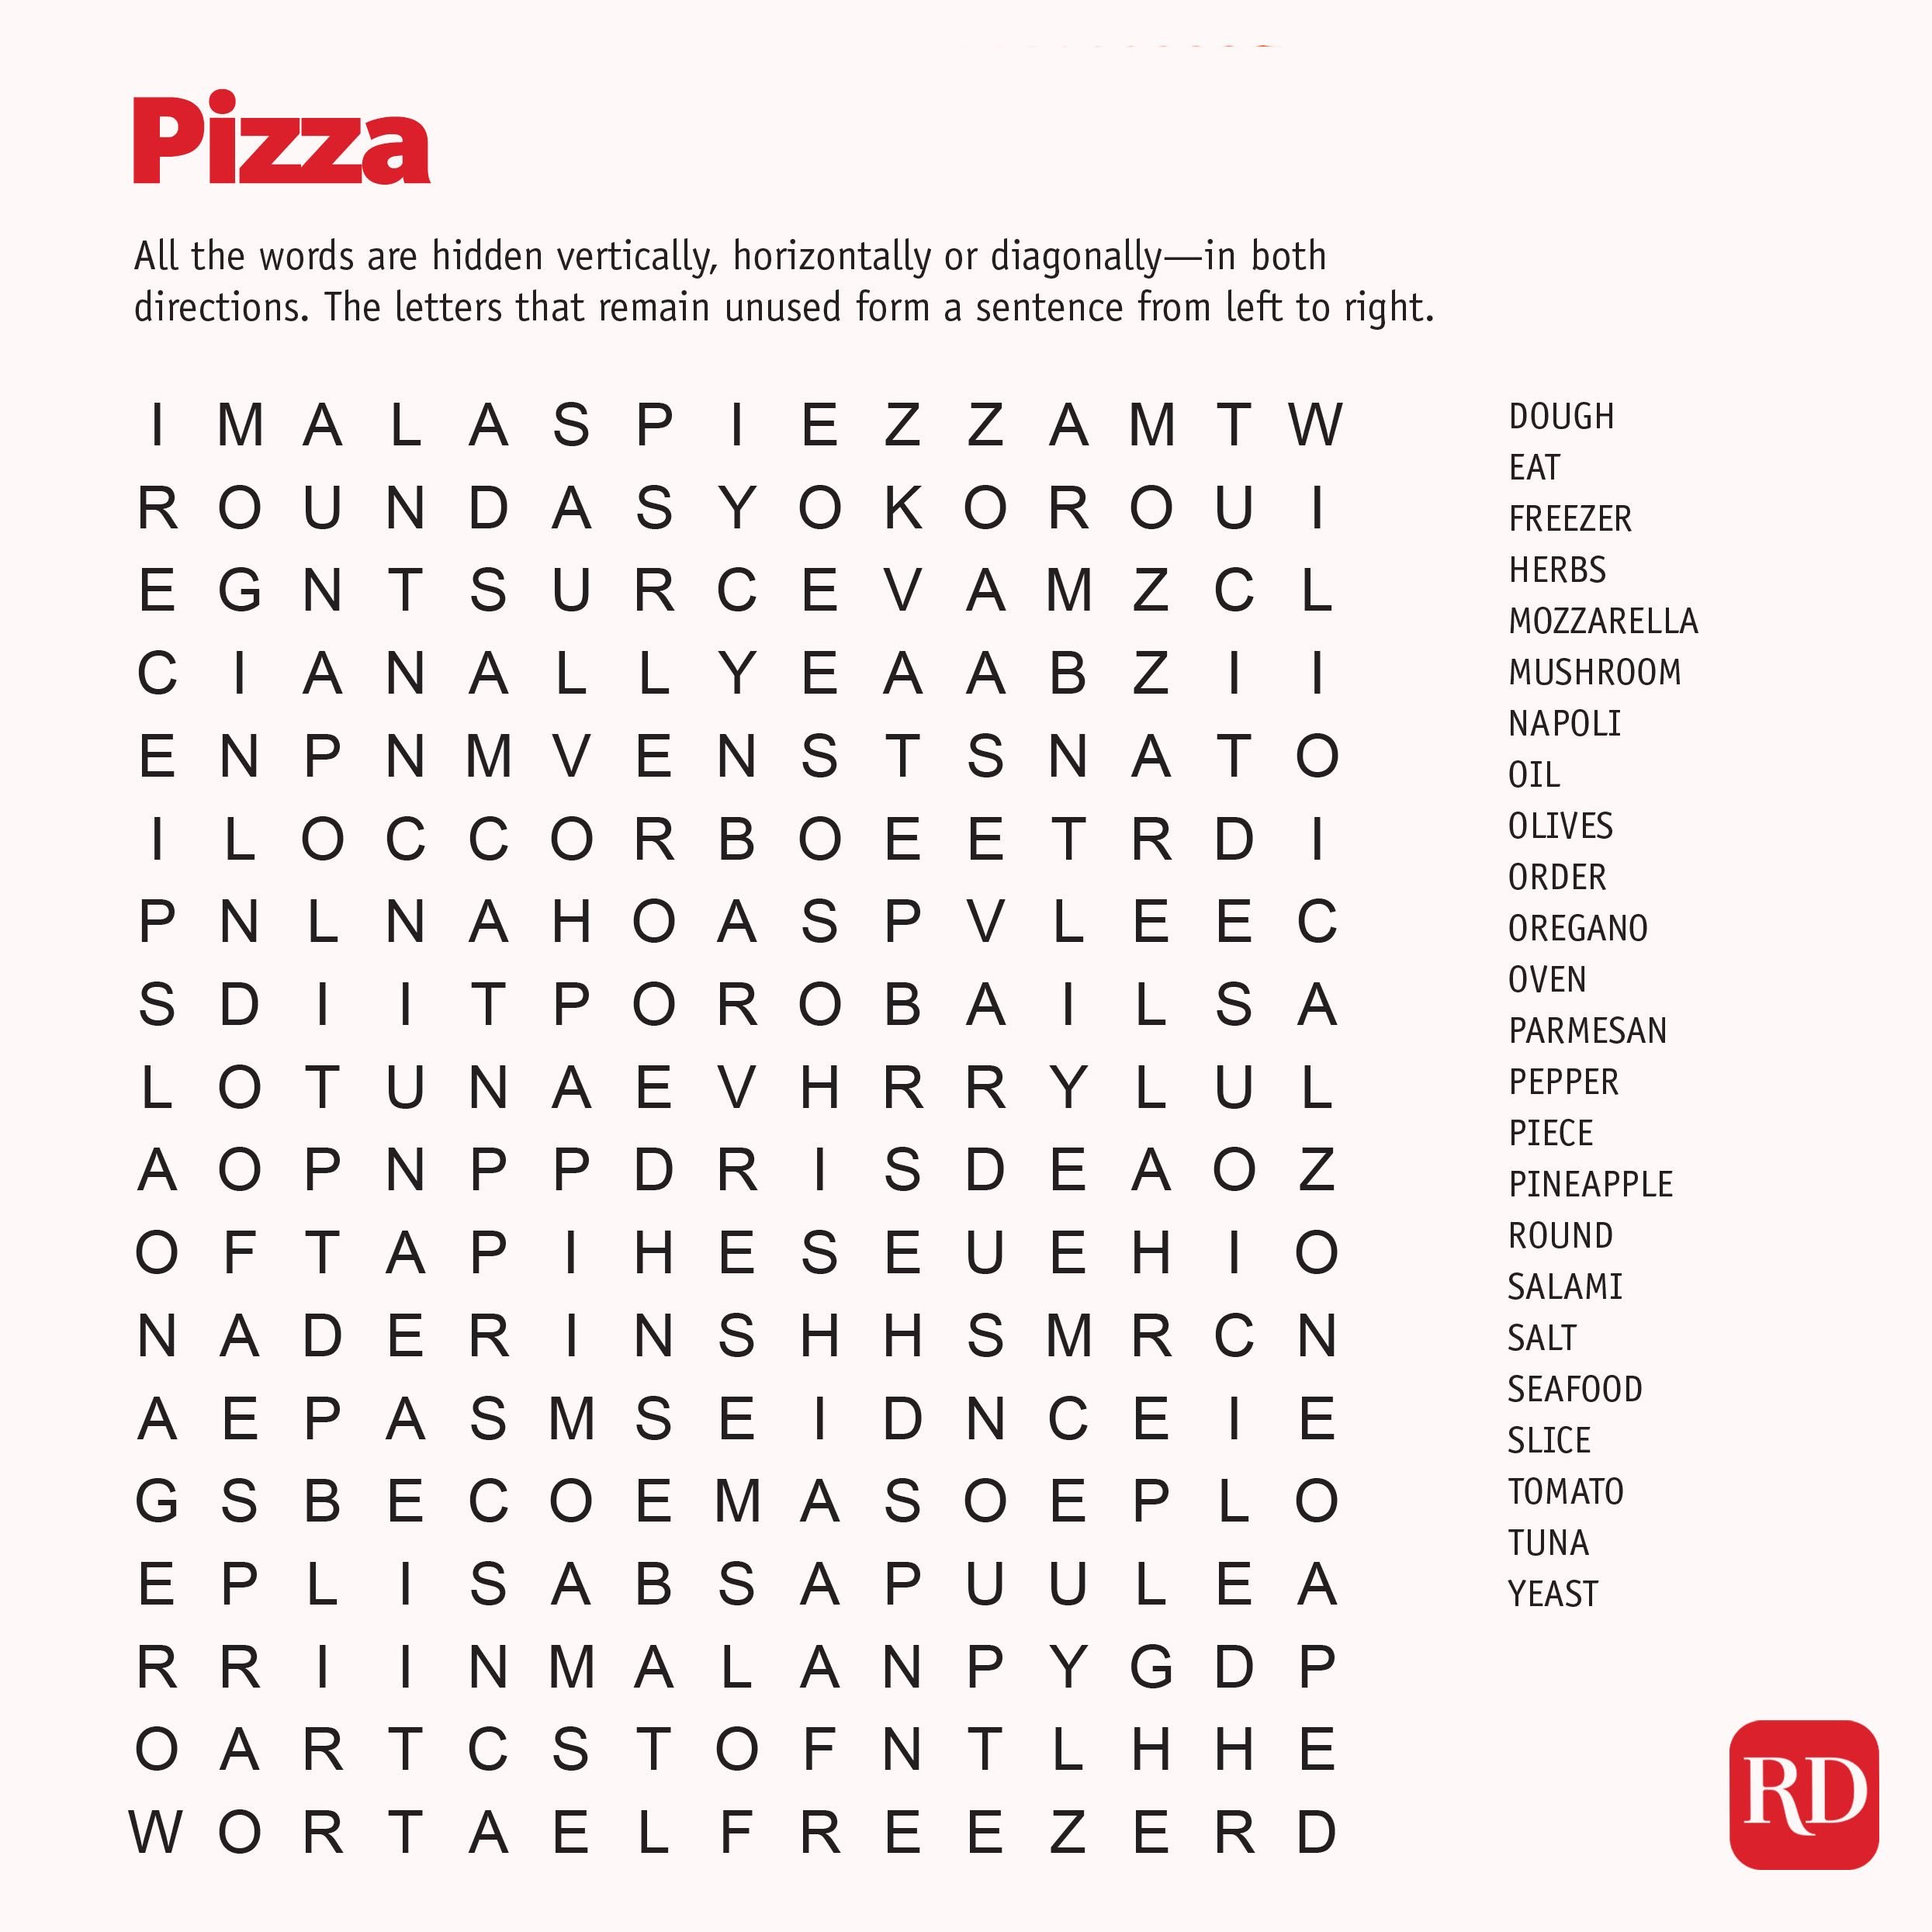 Daily Word Search - Free Online Game